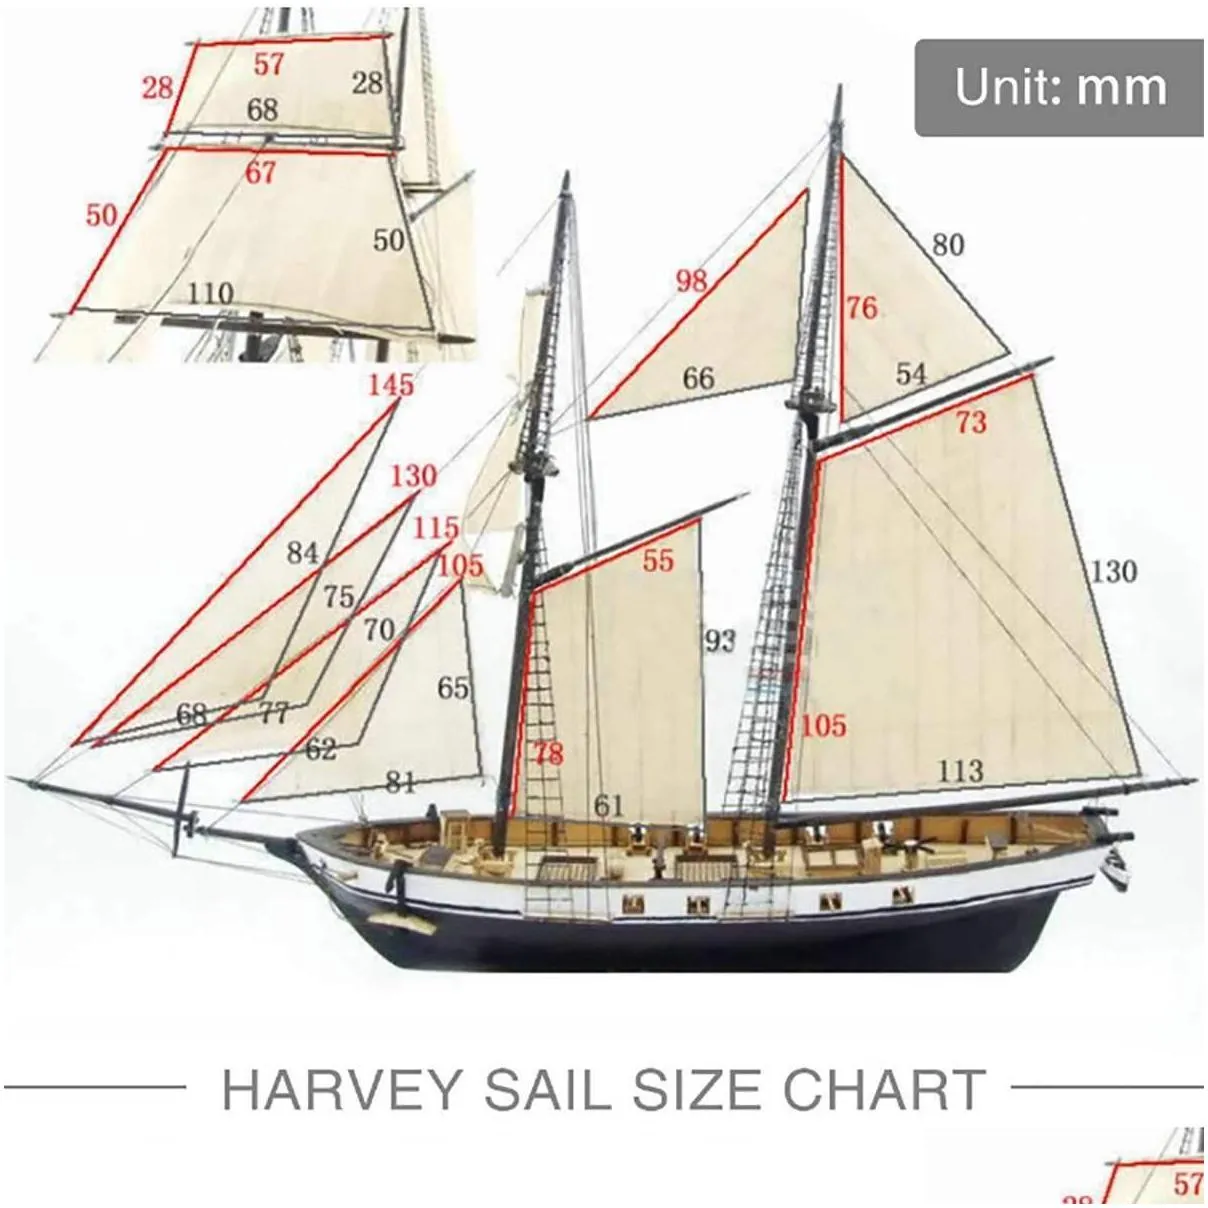 1130 scale sailboat model diy ship assembly model kits figurines miniature handmade wooden sailing boats wood crafts home decor